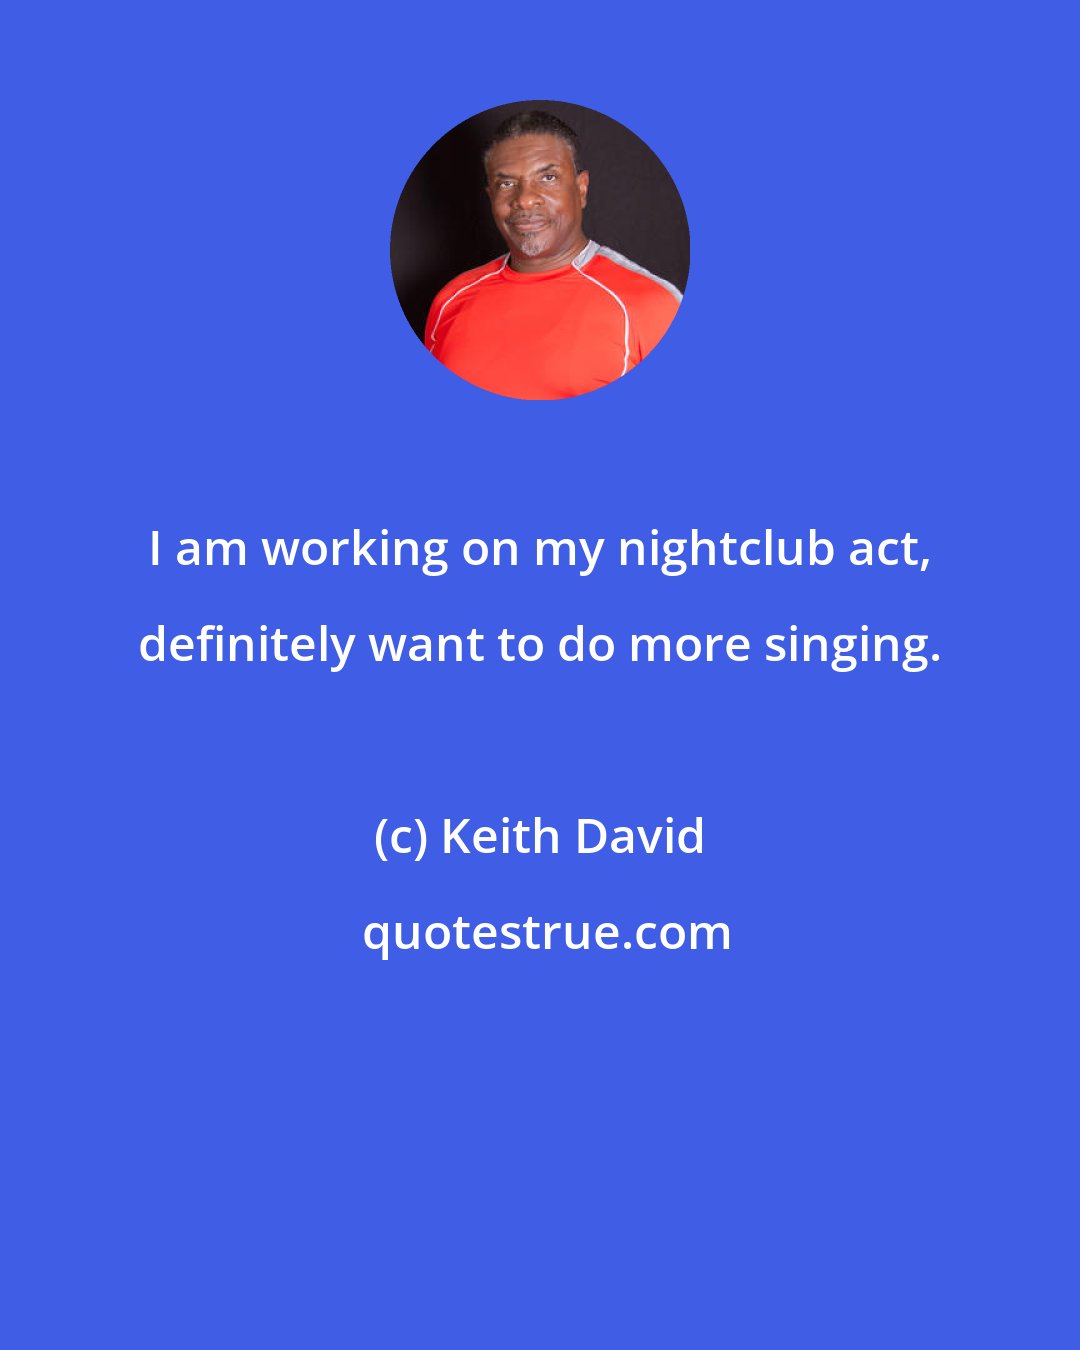 Keith David: I am working on my nightclub act, definitely want to do more singing.